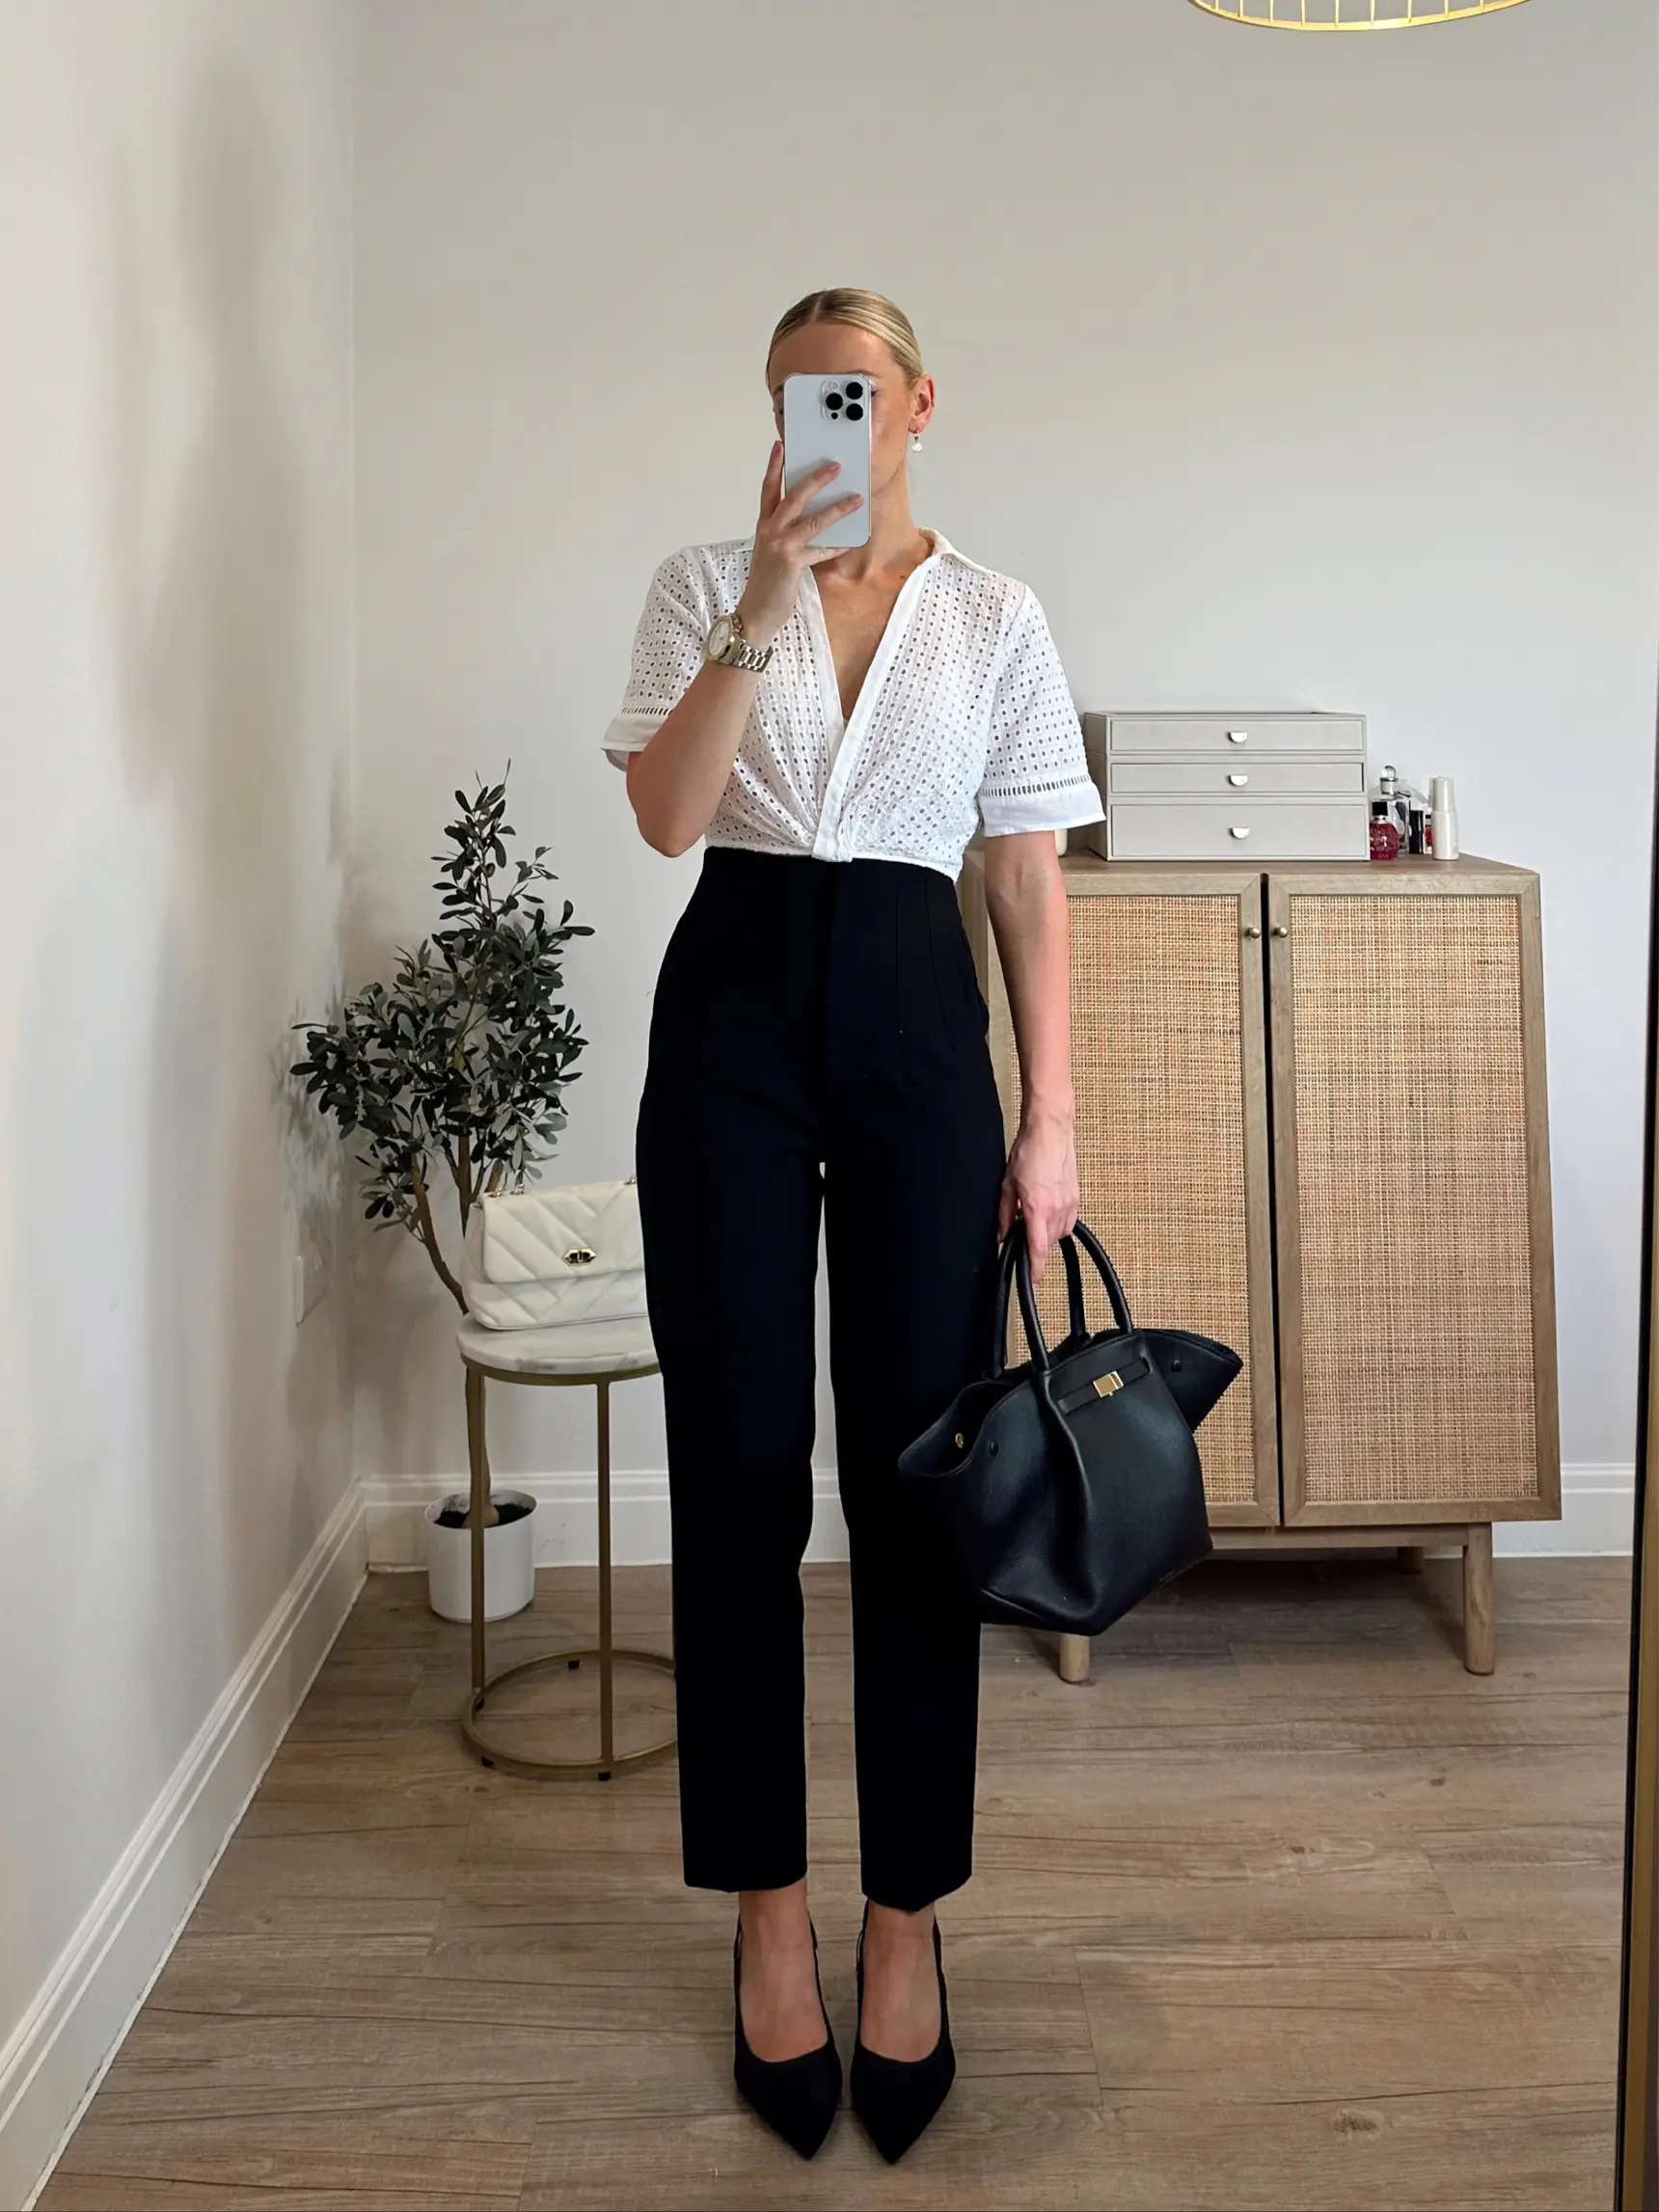 The Perfect Trousers for Petite Women